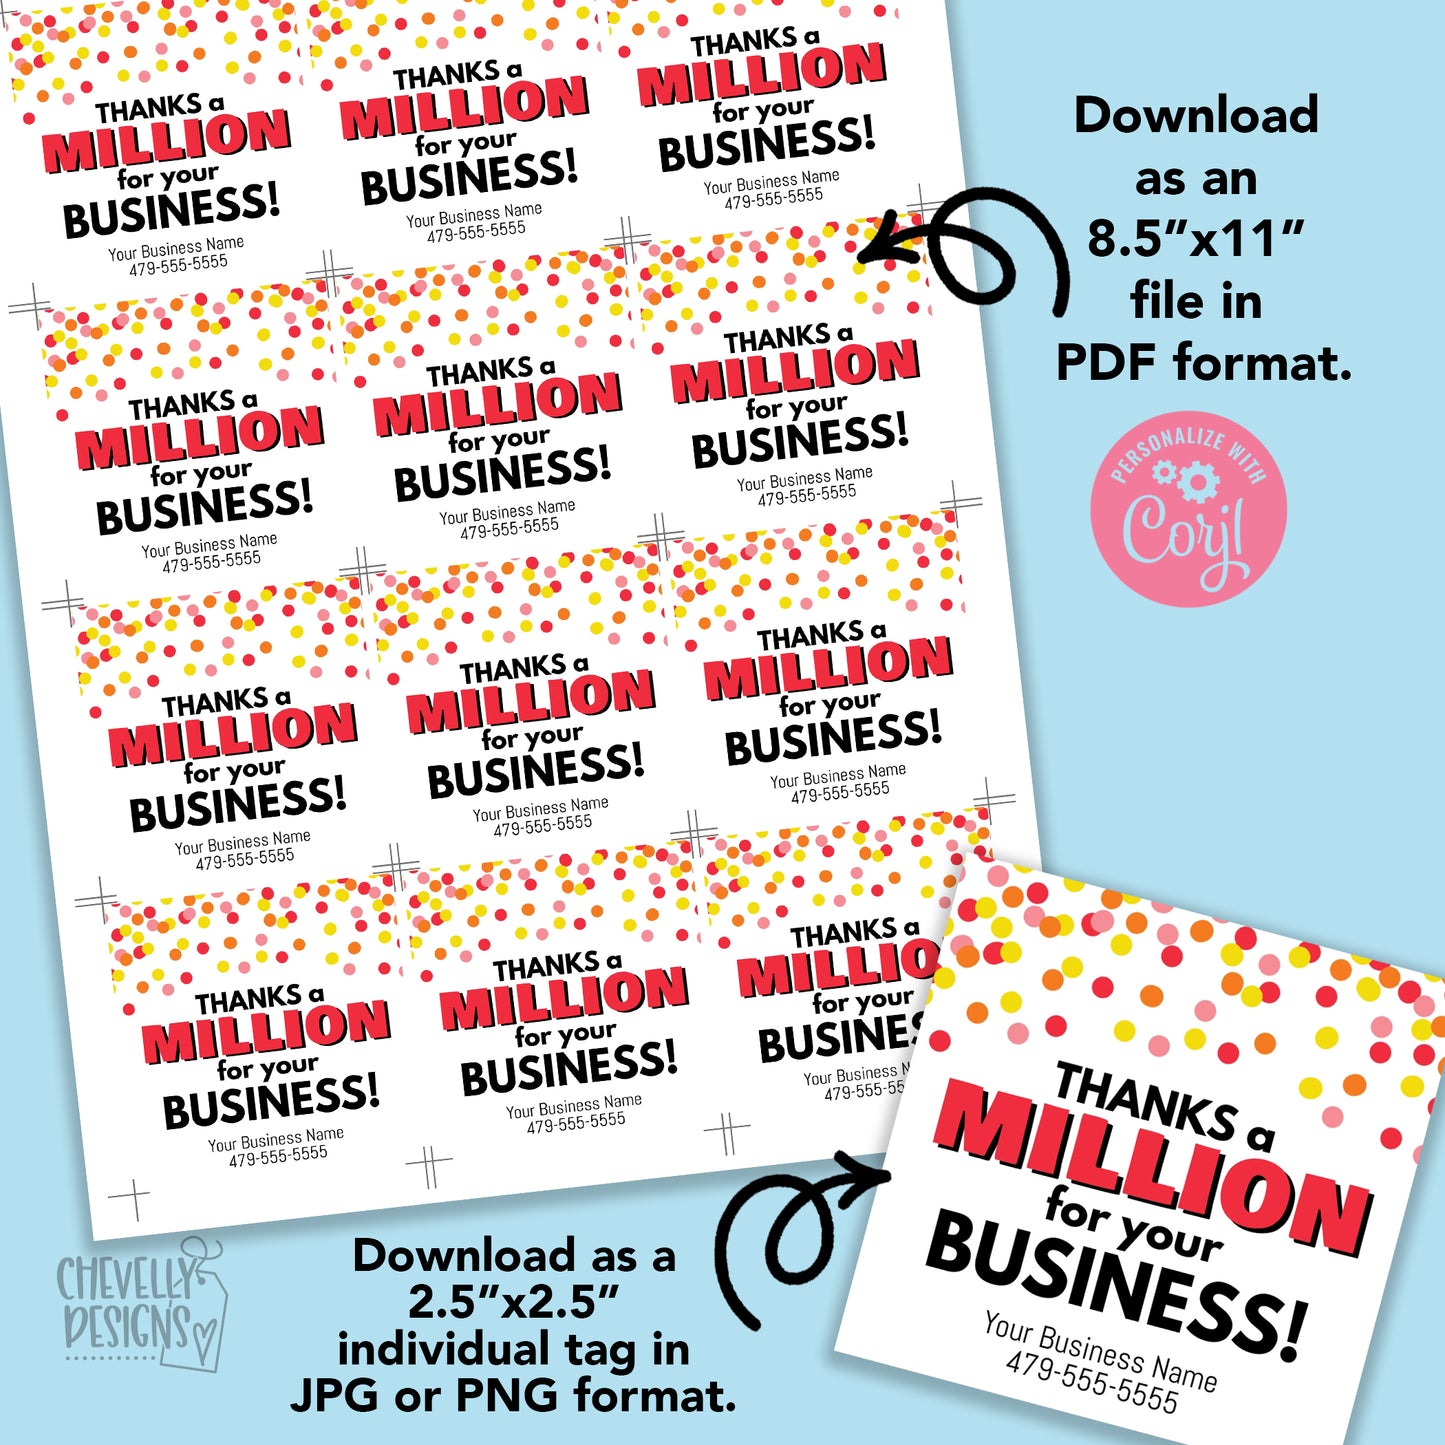 Editable - Thanks a Million for Your Business - 100 Grand Referral Marketing Tags - Printable Digital File